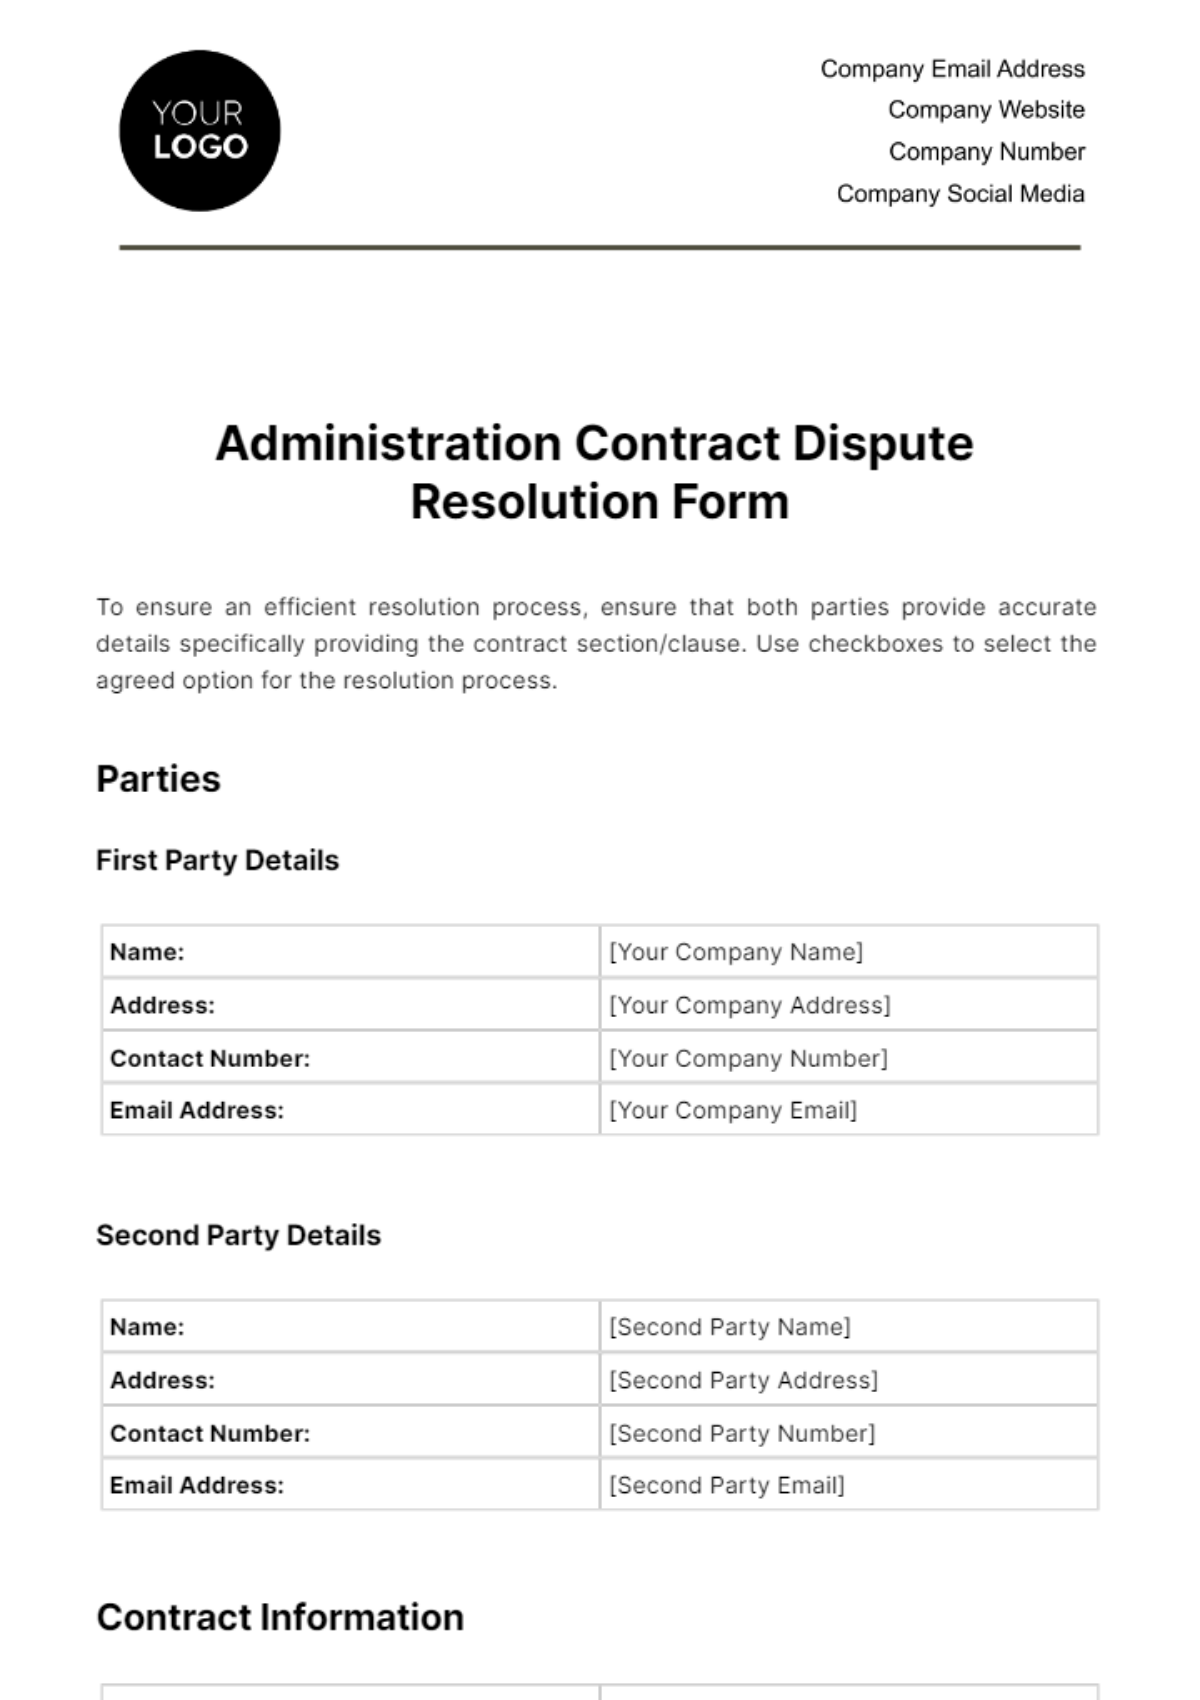 Administration Contract Dispute Resolution Form Template